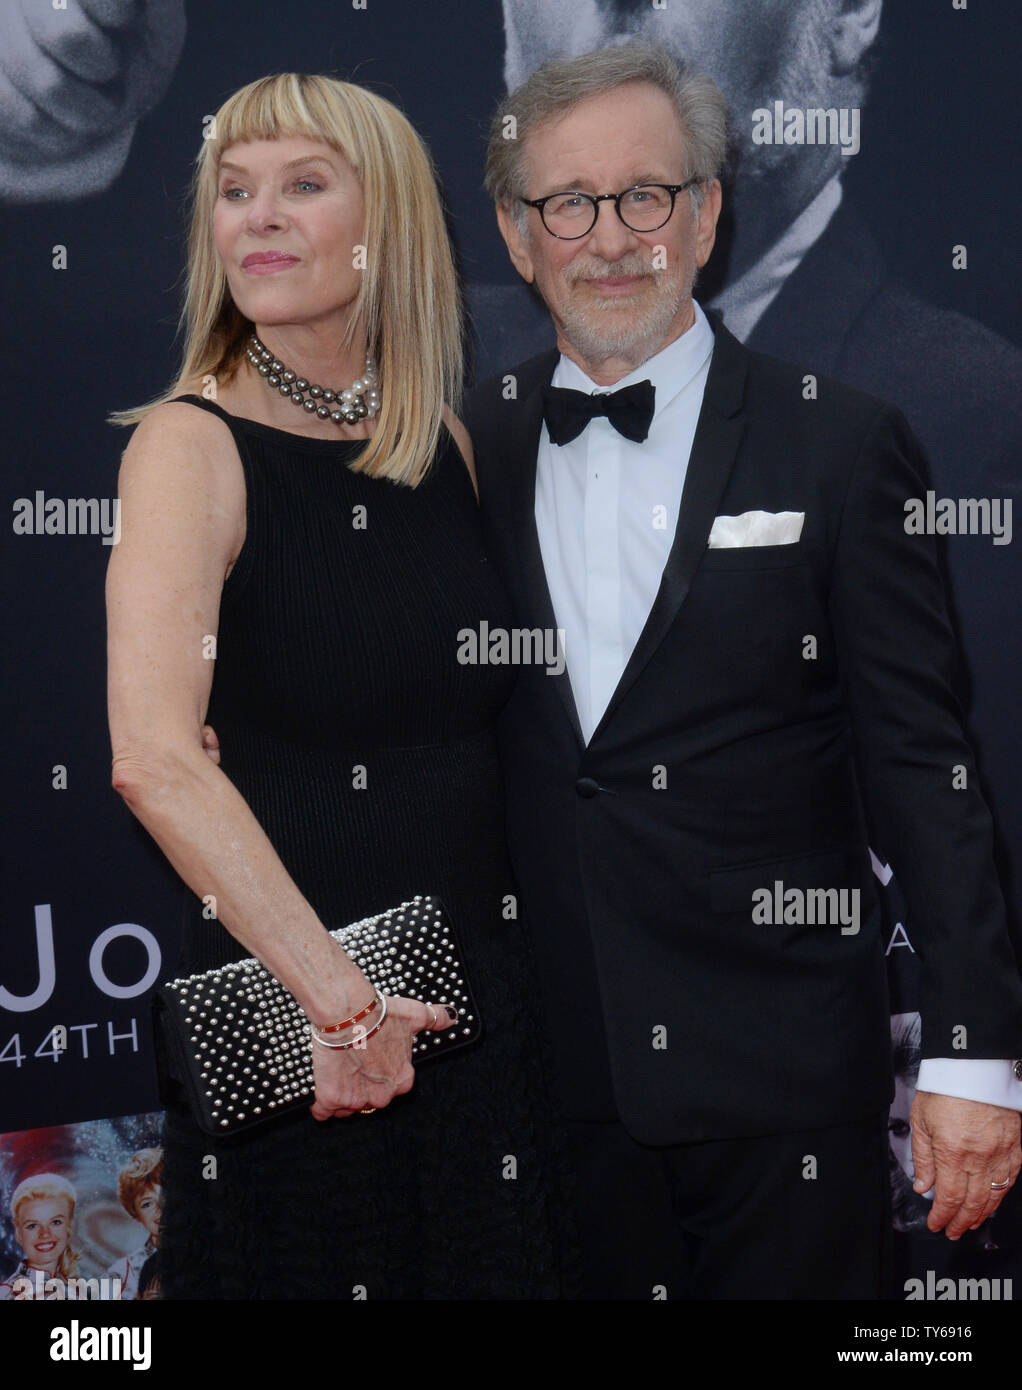 Director Steven Spielberg and his wife, actress Kate Capshaw attend American Film Institute's 44th Life Achievement Award gala tribute to composer John Williams at the Dolby Theatre in the Hollywood section of Los Angeles on June 9, 2016. Over six decades in Hollywood, Williams has written some of the most memorable music in movie history. His 100-plus features have earned 50 Academy Award nominations (making him the most-nominated living person), winning five times. Williams also received 22 Grammys, seven BAFTAs, five Emmys, four Golden Globes, a Kennedy Center Honor and the National Medal o Stock Photo